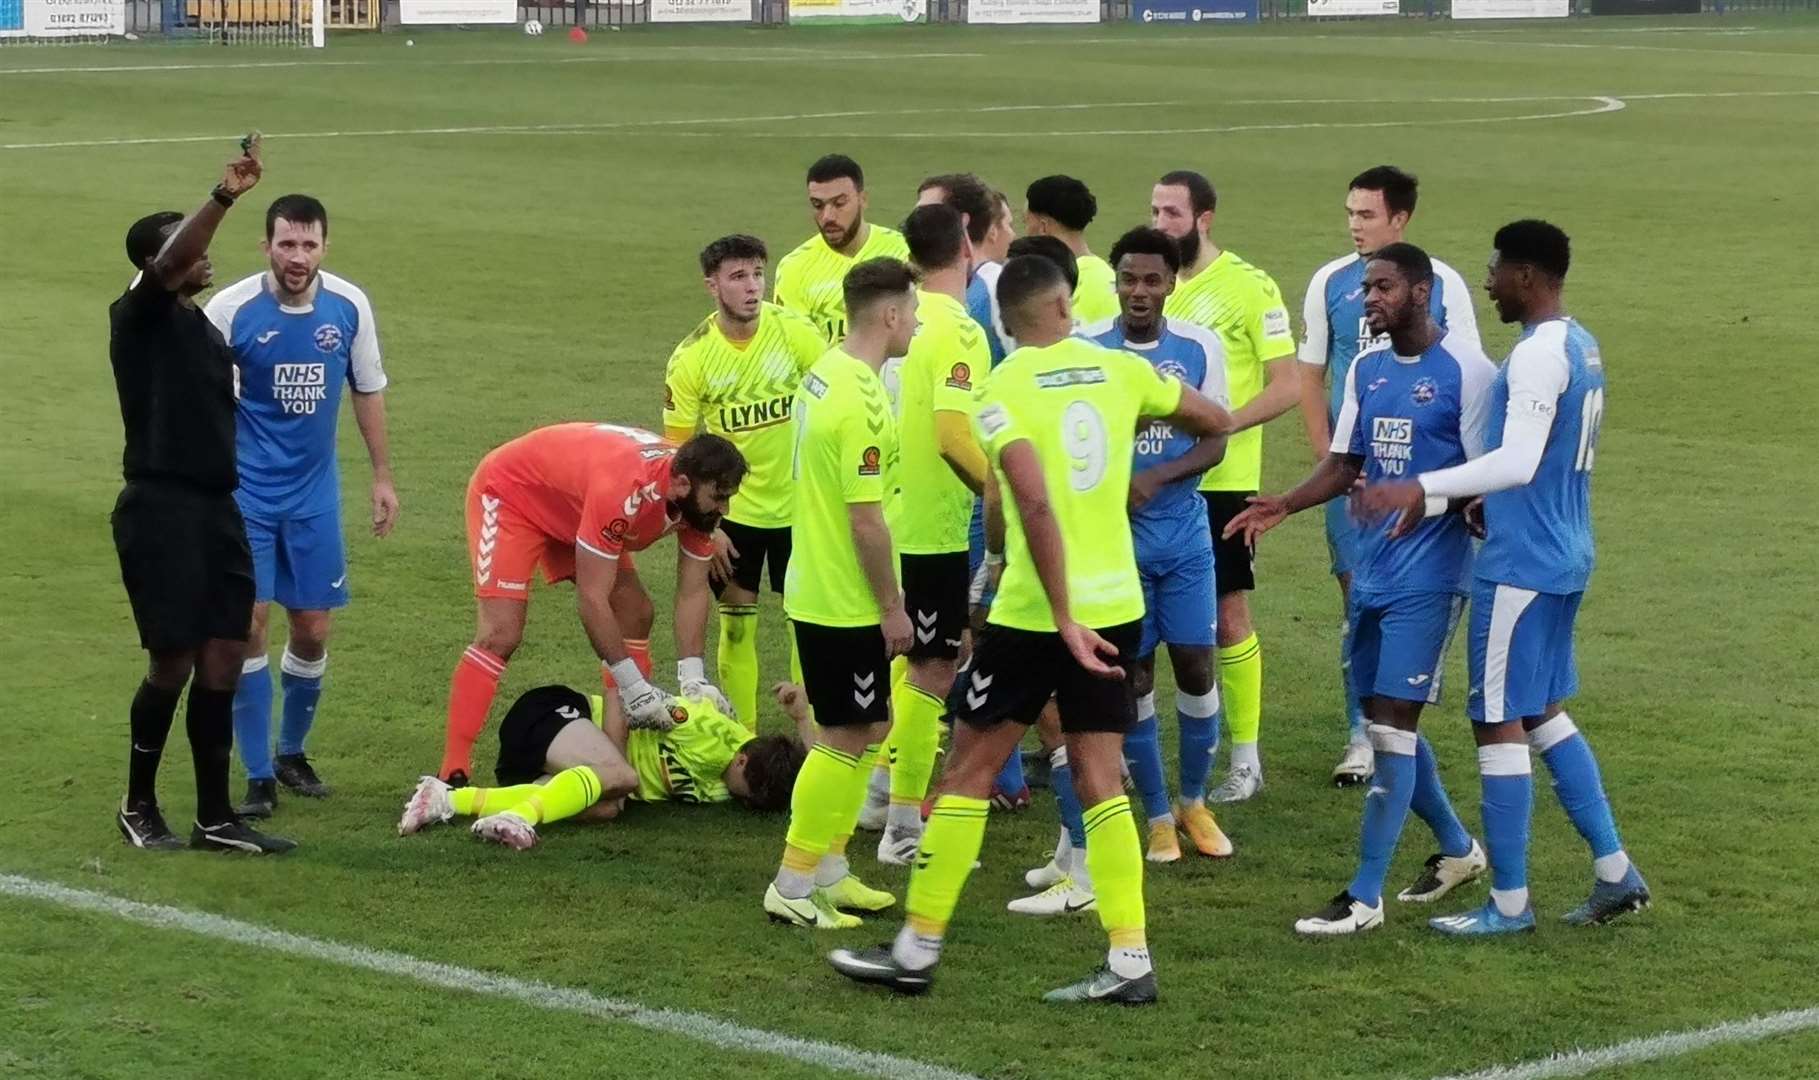 Players from both sides converge after Tonbridge's Tom Beere is shown a red card against Hemel. (43325826)